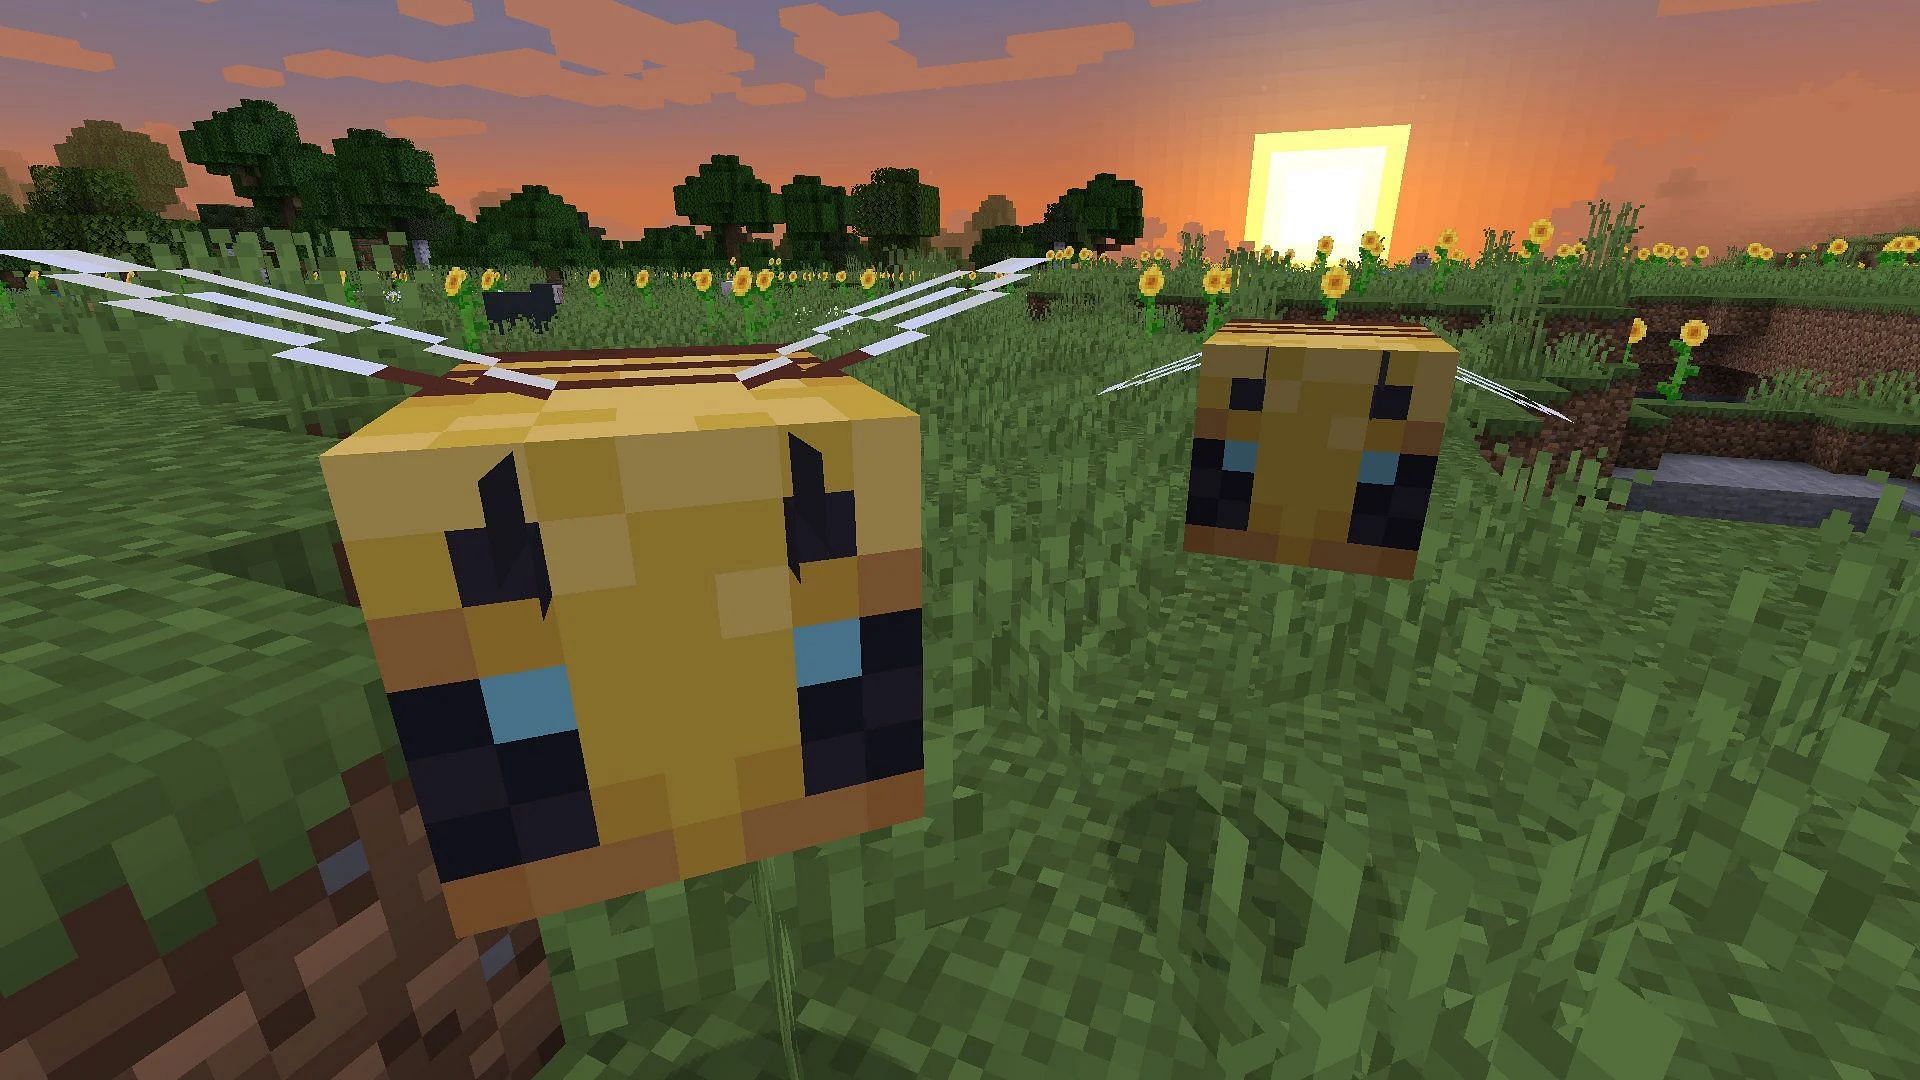 Bees in a field (Image via Minecraft)